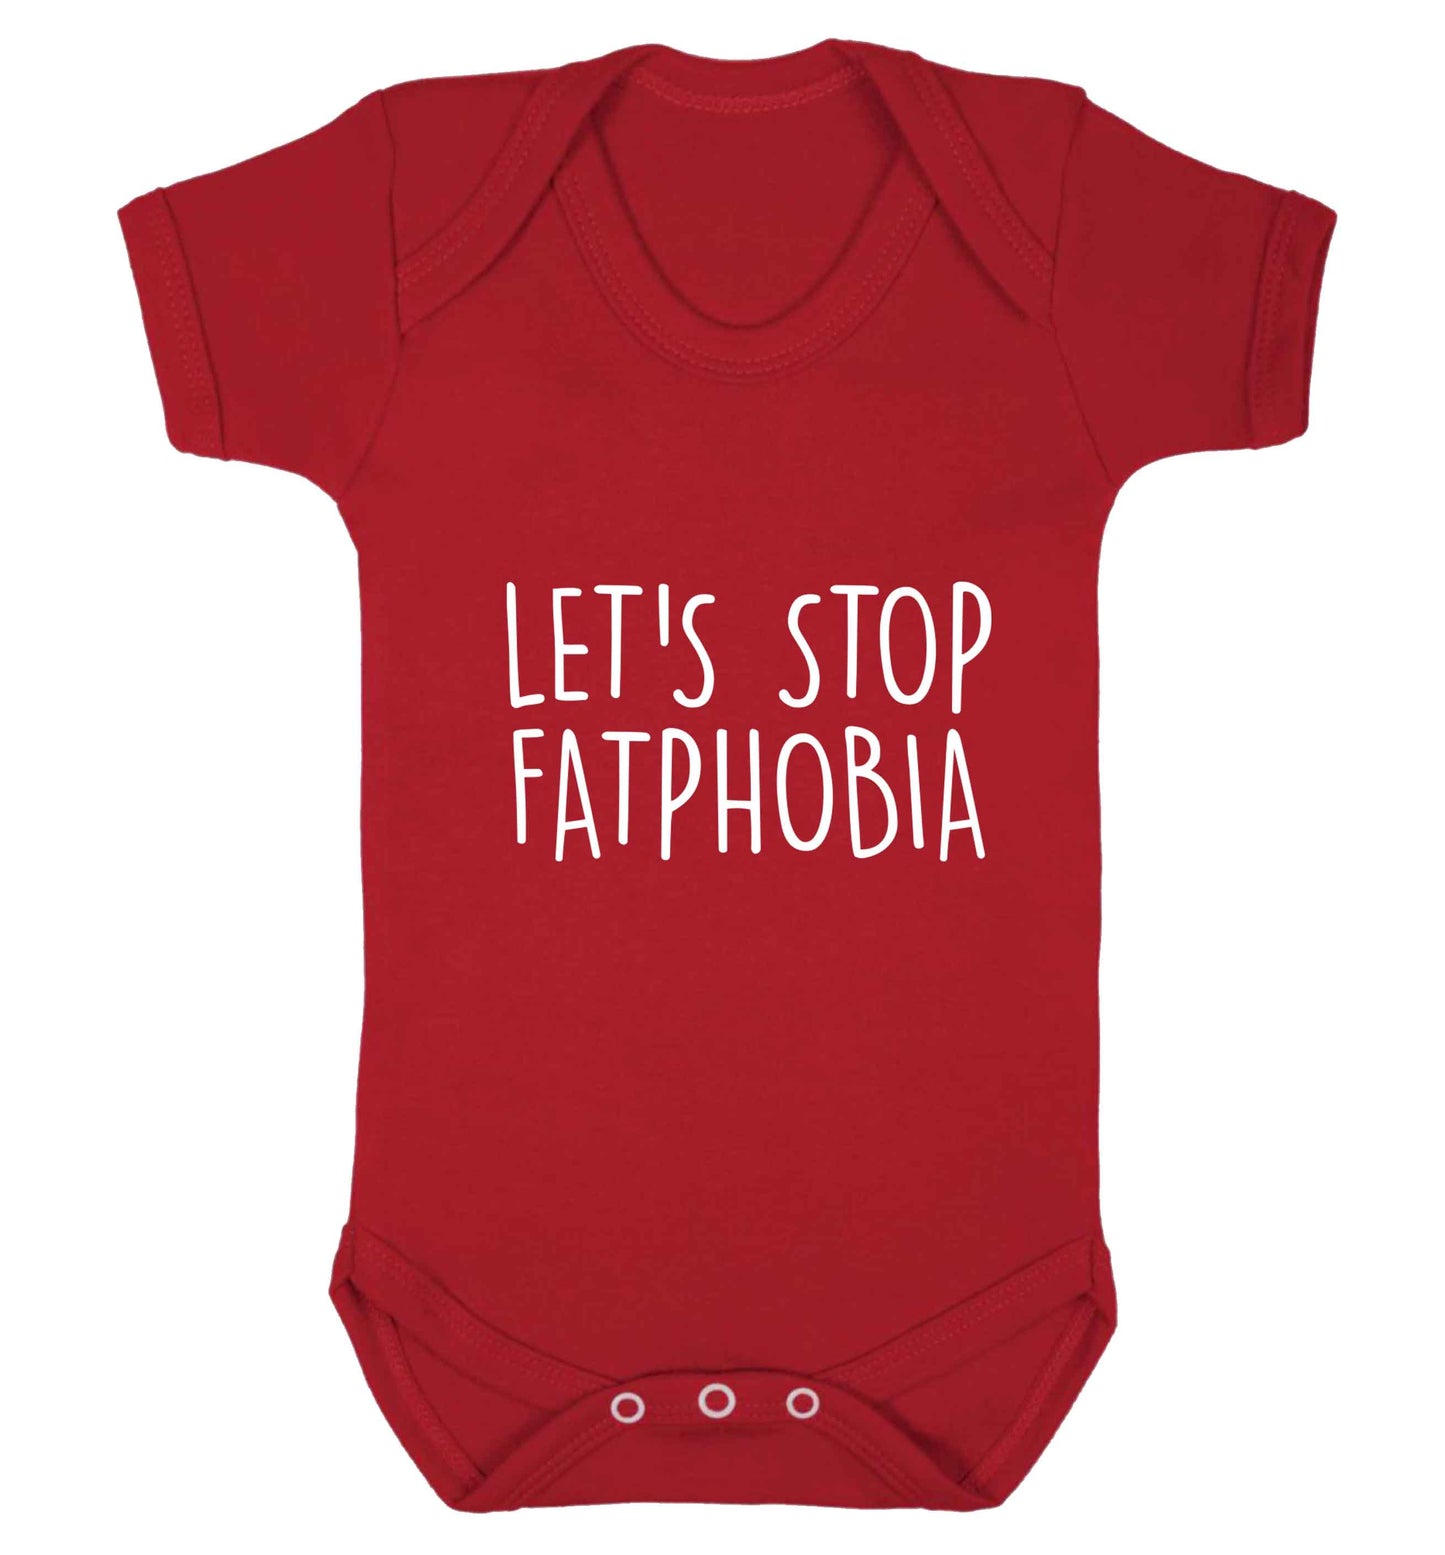 Let's stop fatphobia baby vest red 18-24 months